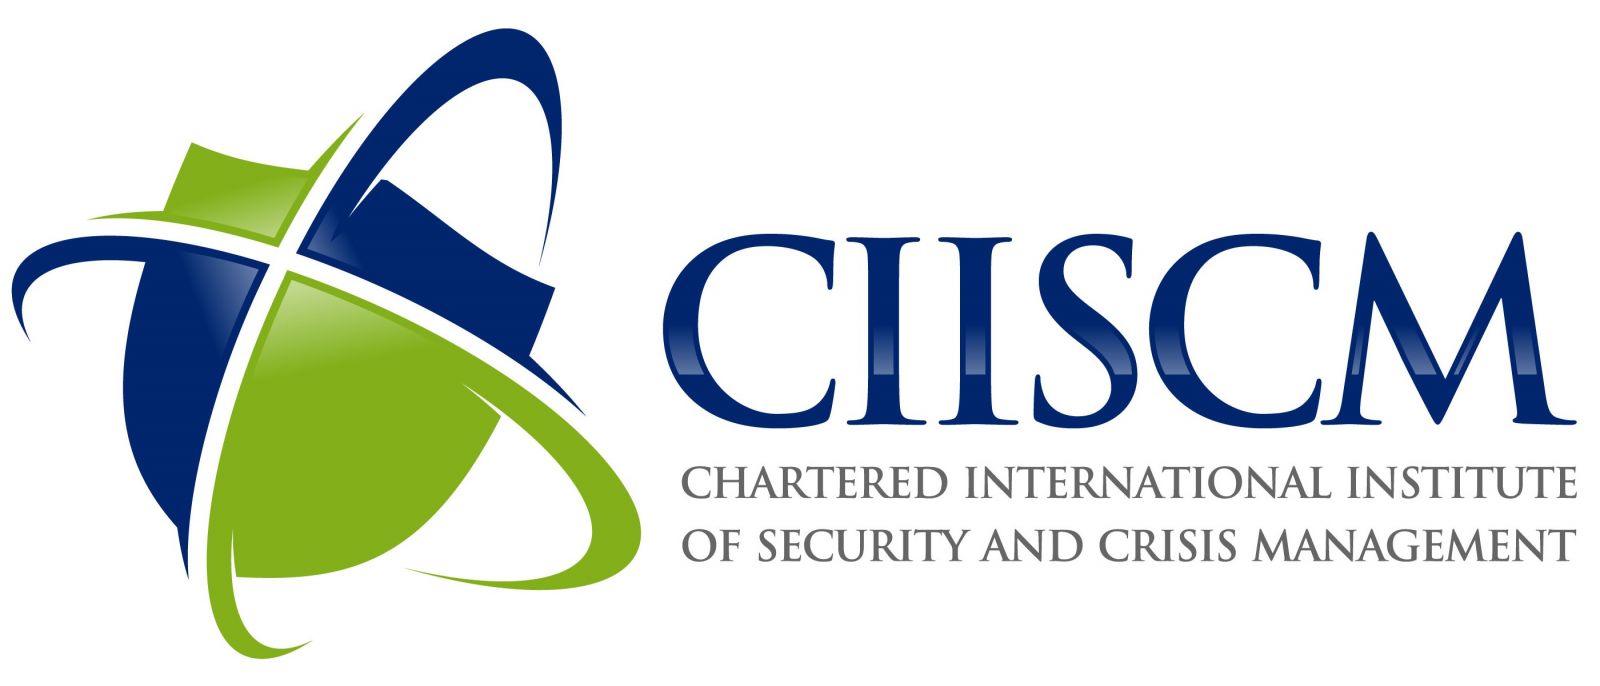 Chartered International Institute of Security and Crisis Management